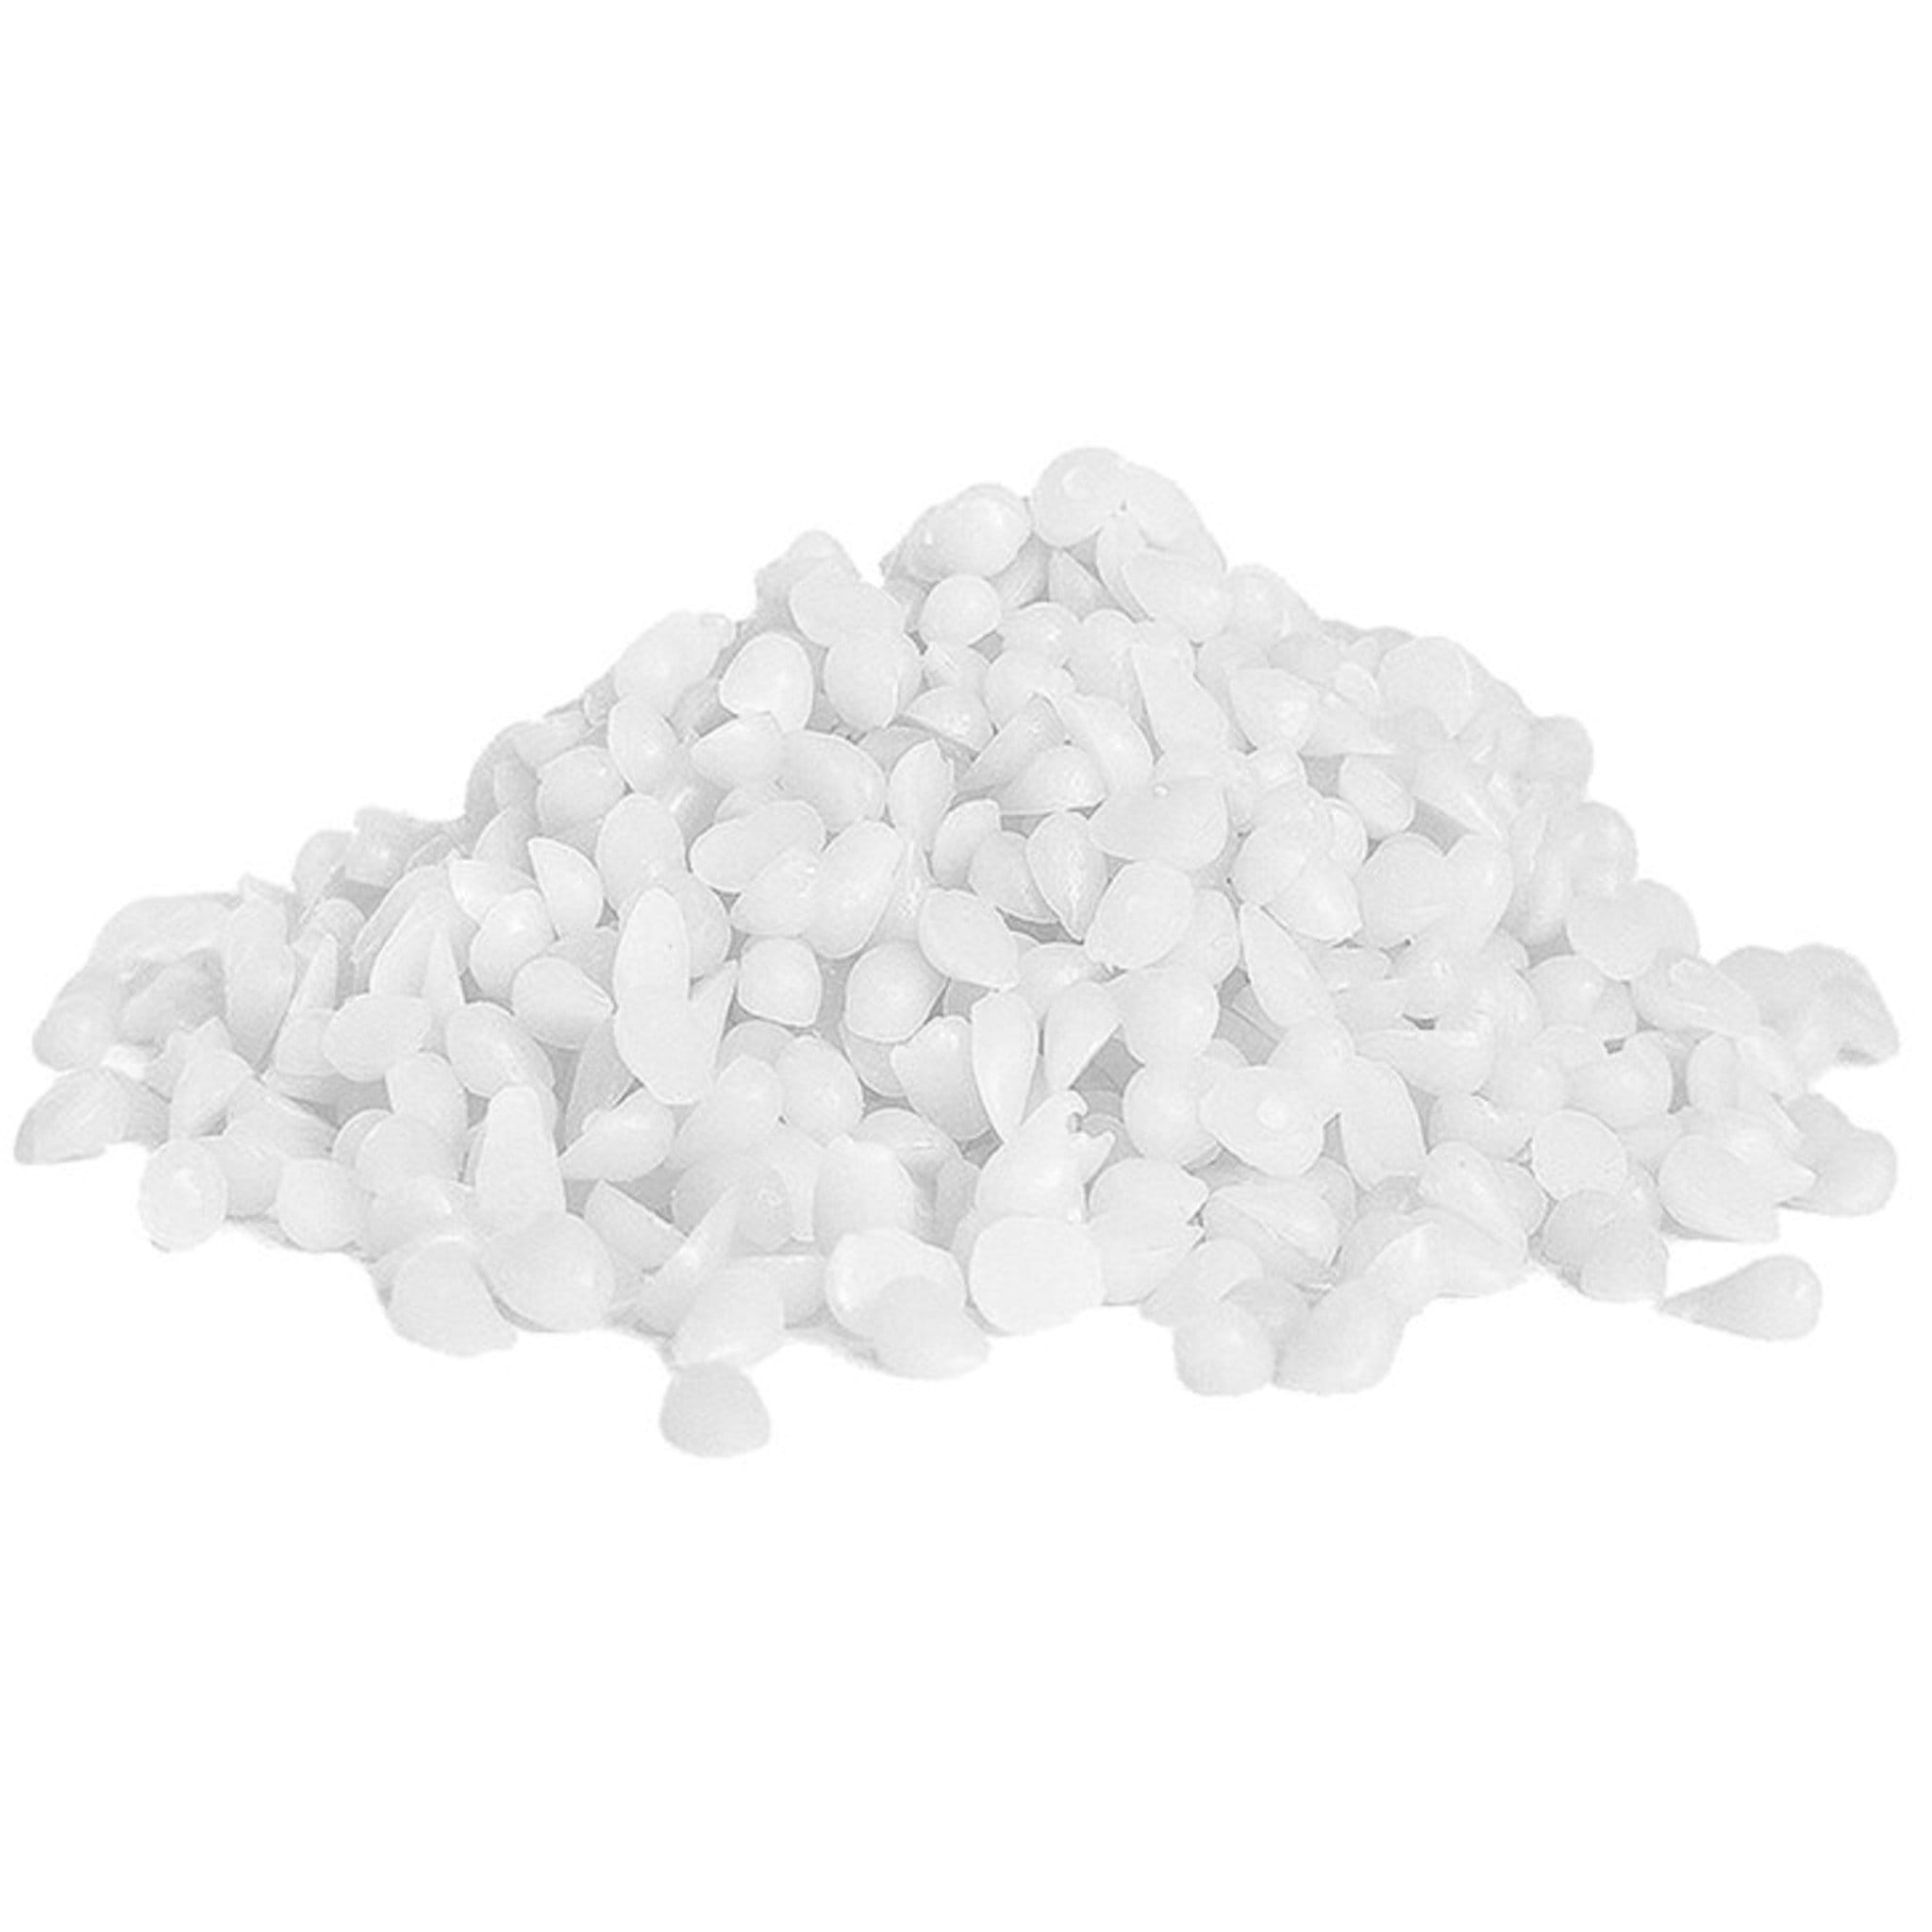 TooGet Pure White Beeswax Pellets, Natural Beeswax Beads, Beeswax Pastilles - Premium Quality, Cosmetic Grade - 14 oz